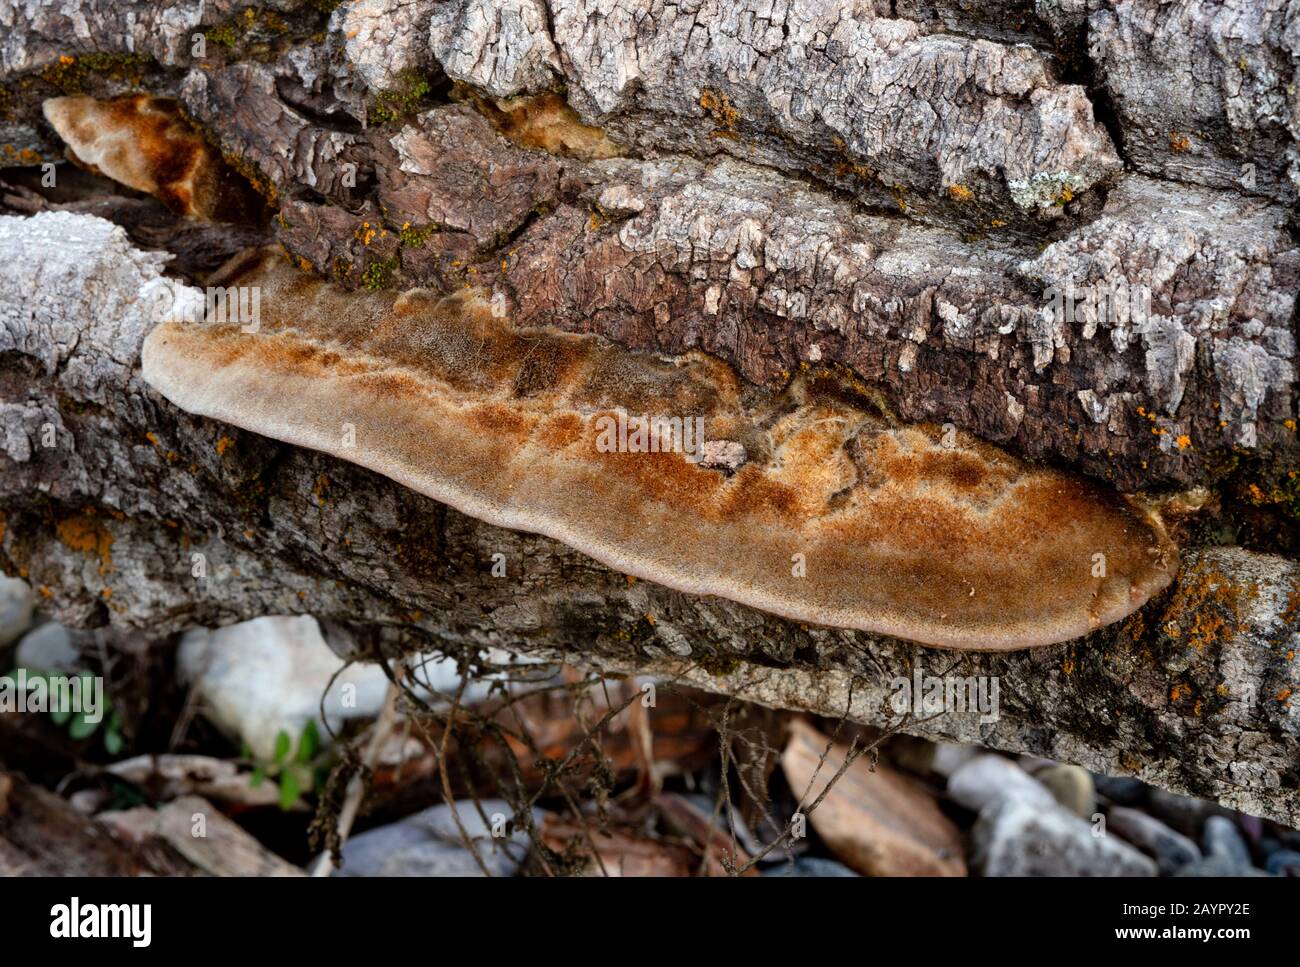 Trog's tramete. The fruiting body of a white rot fungus, Trametes trogii, growing on the trunk of a dead black cottonwood tree. Stock Photo